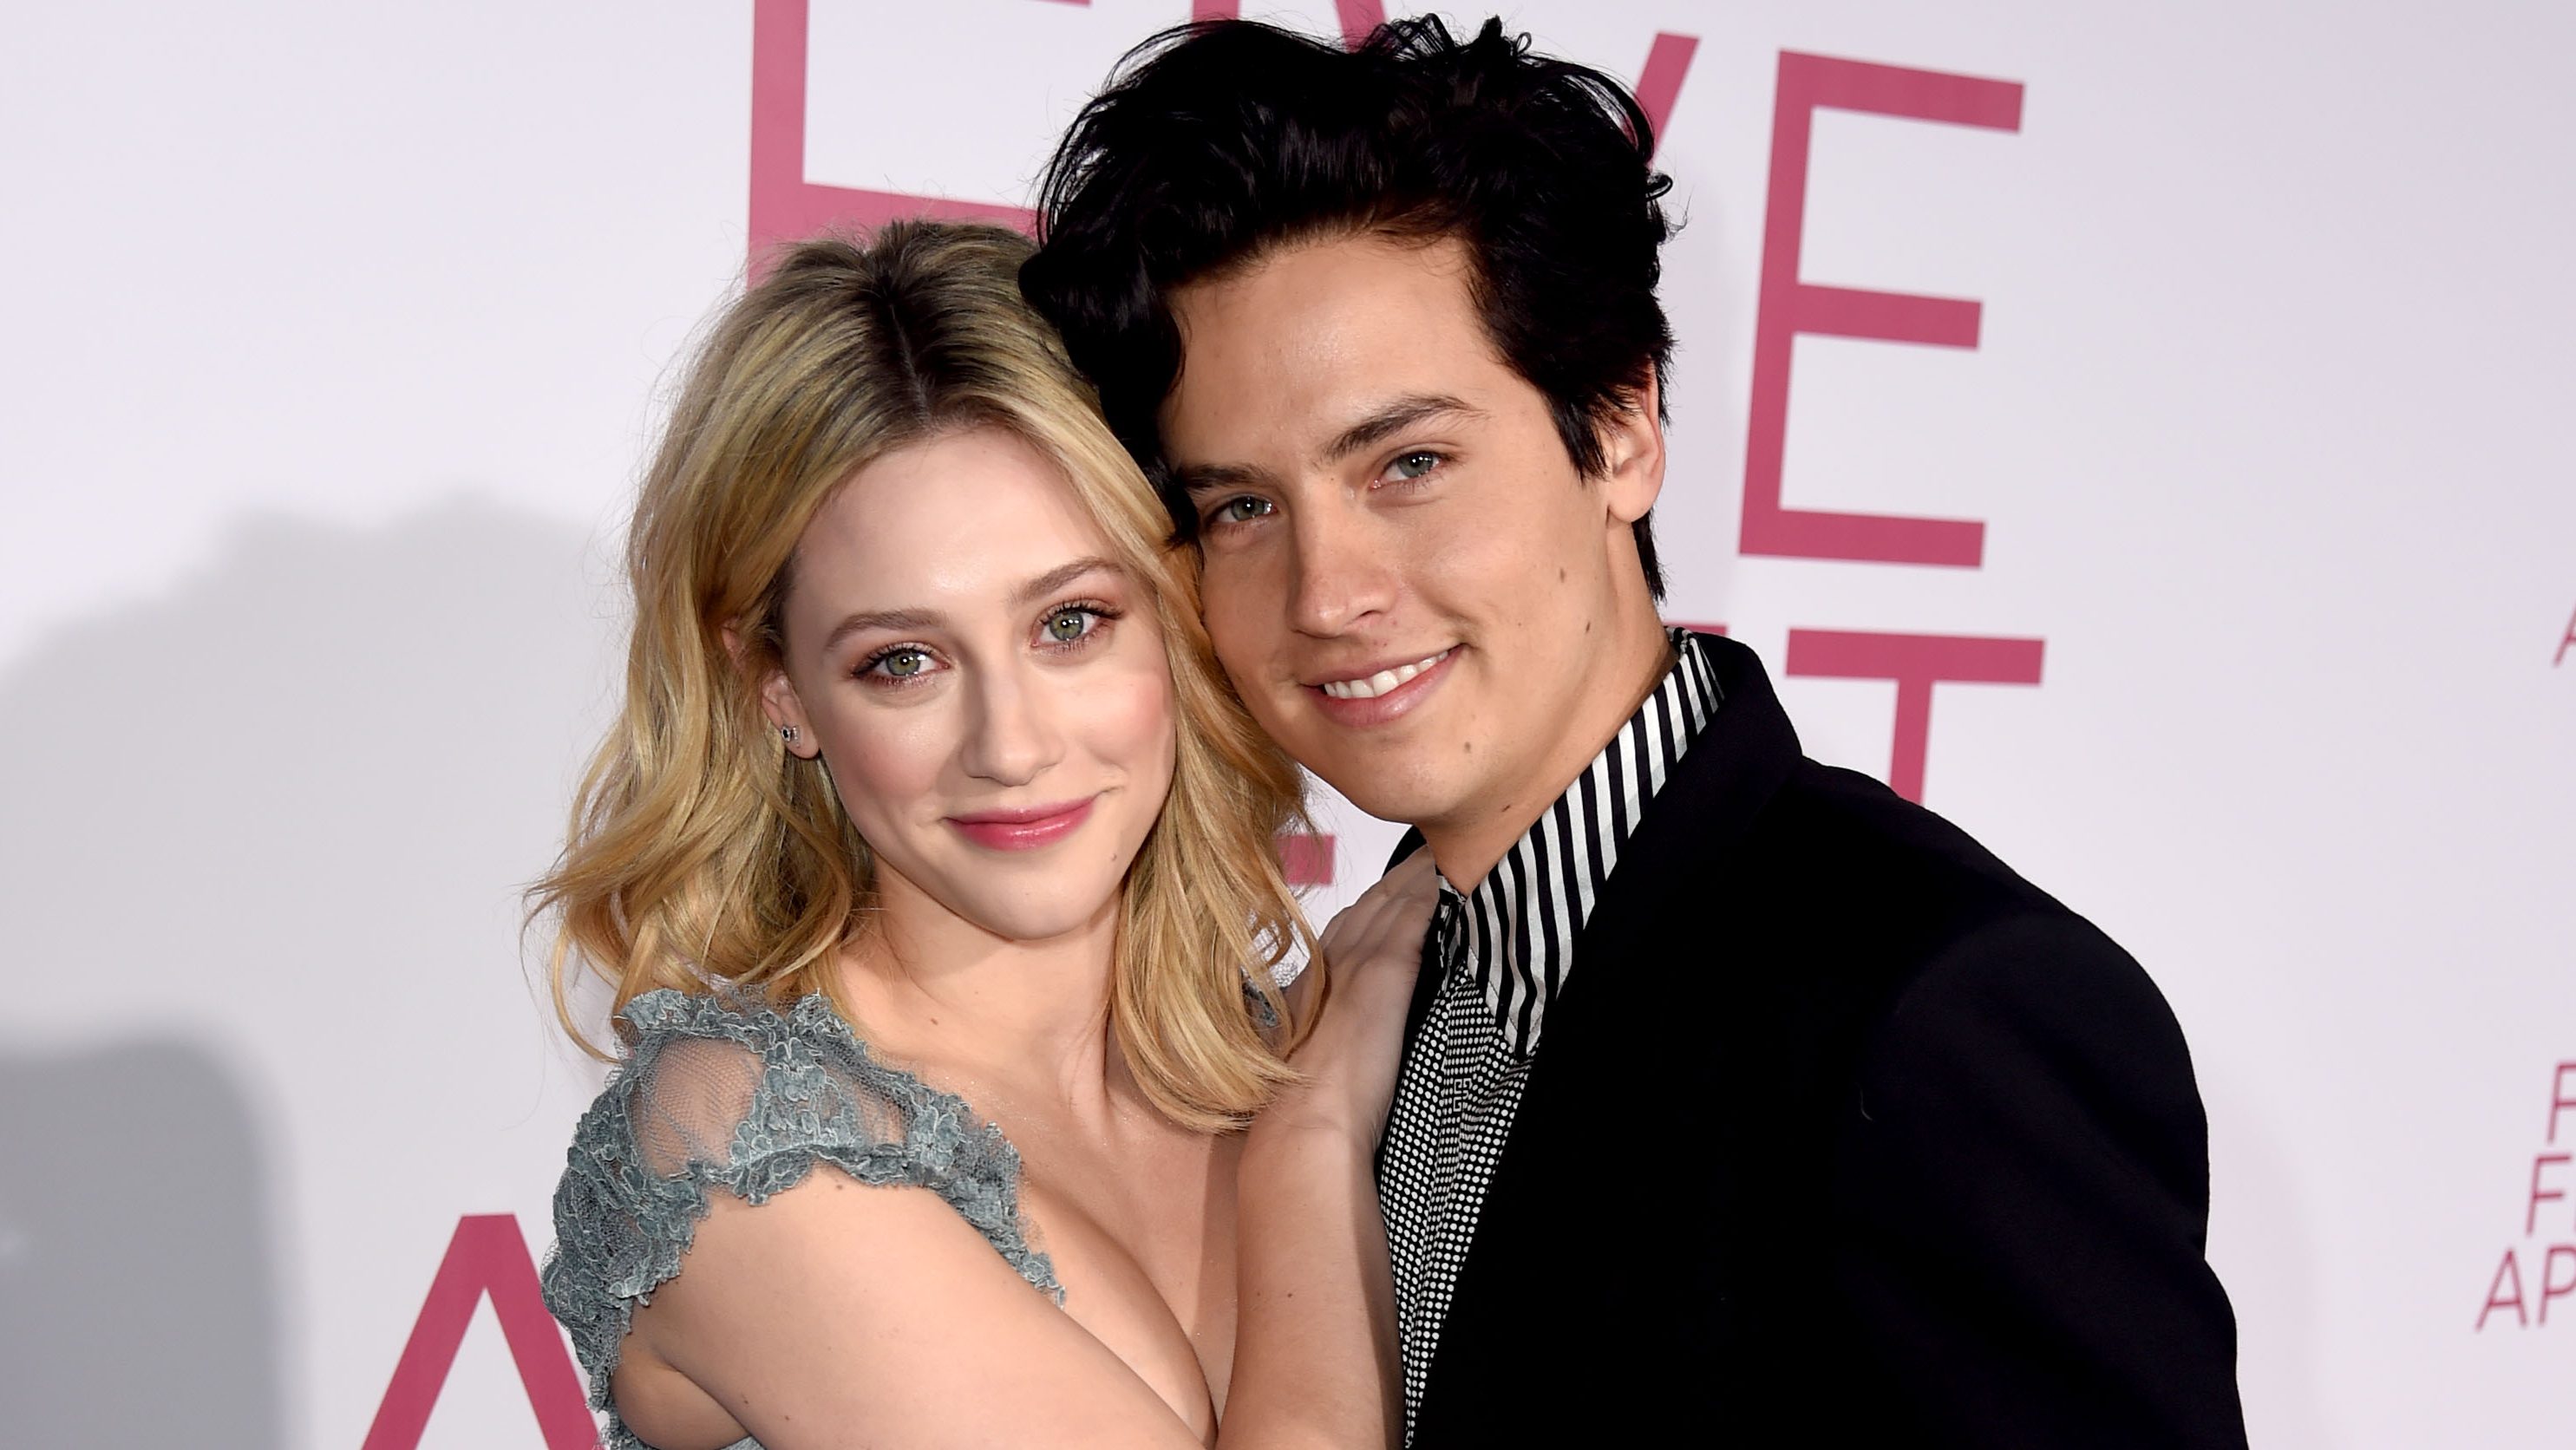 Lili Reinhart & Cole Sprouse Say They Are Not Broken Up